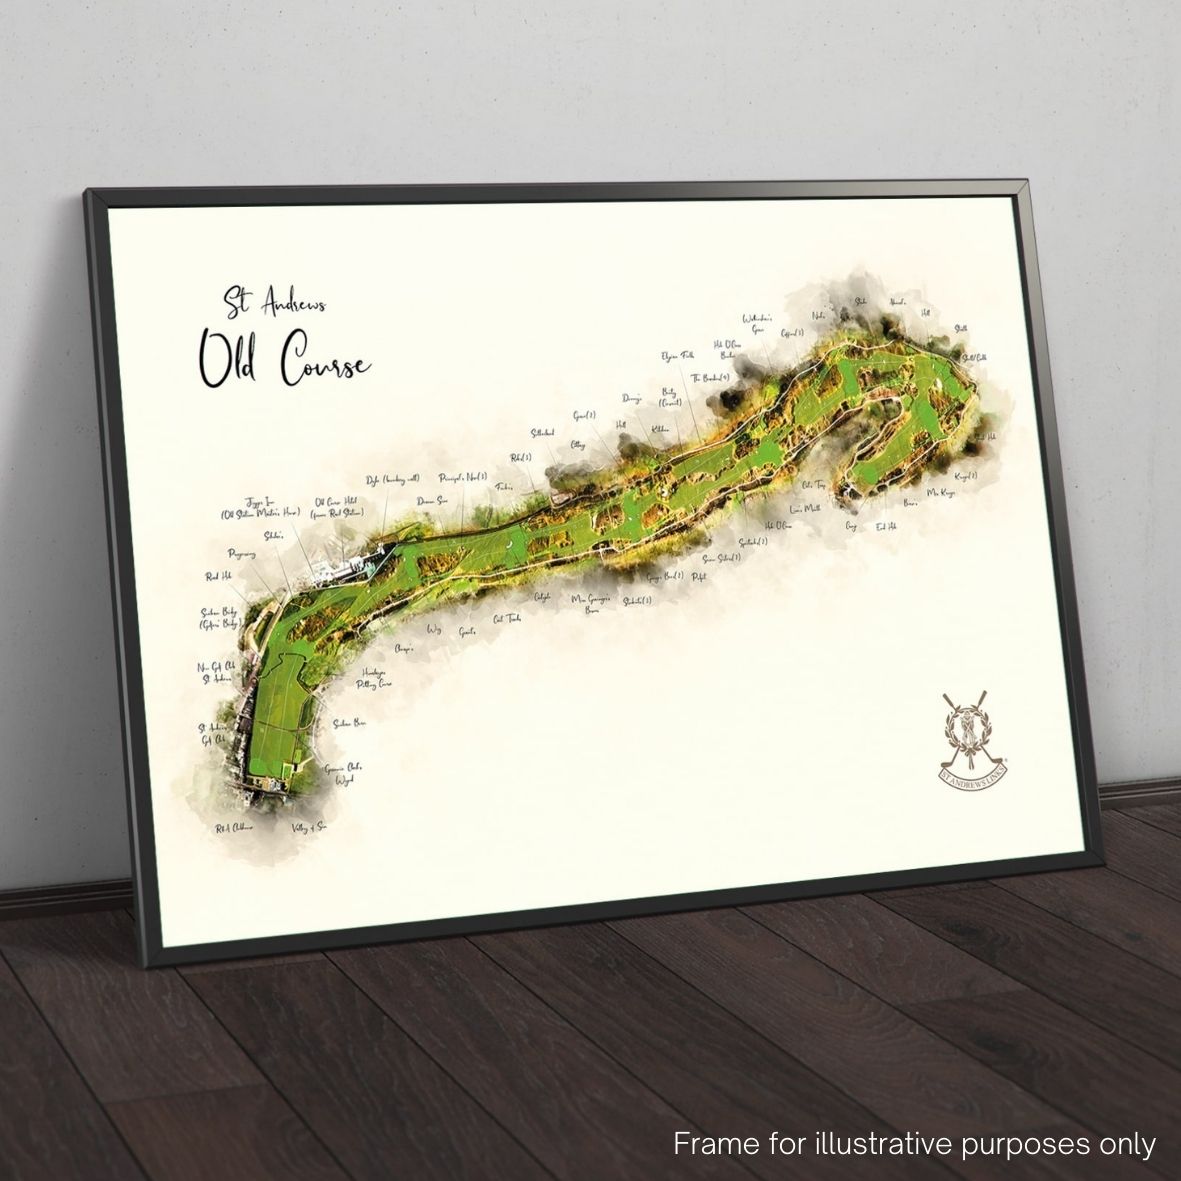 Framed print of St Andrews Old Course by Joe McDonnell